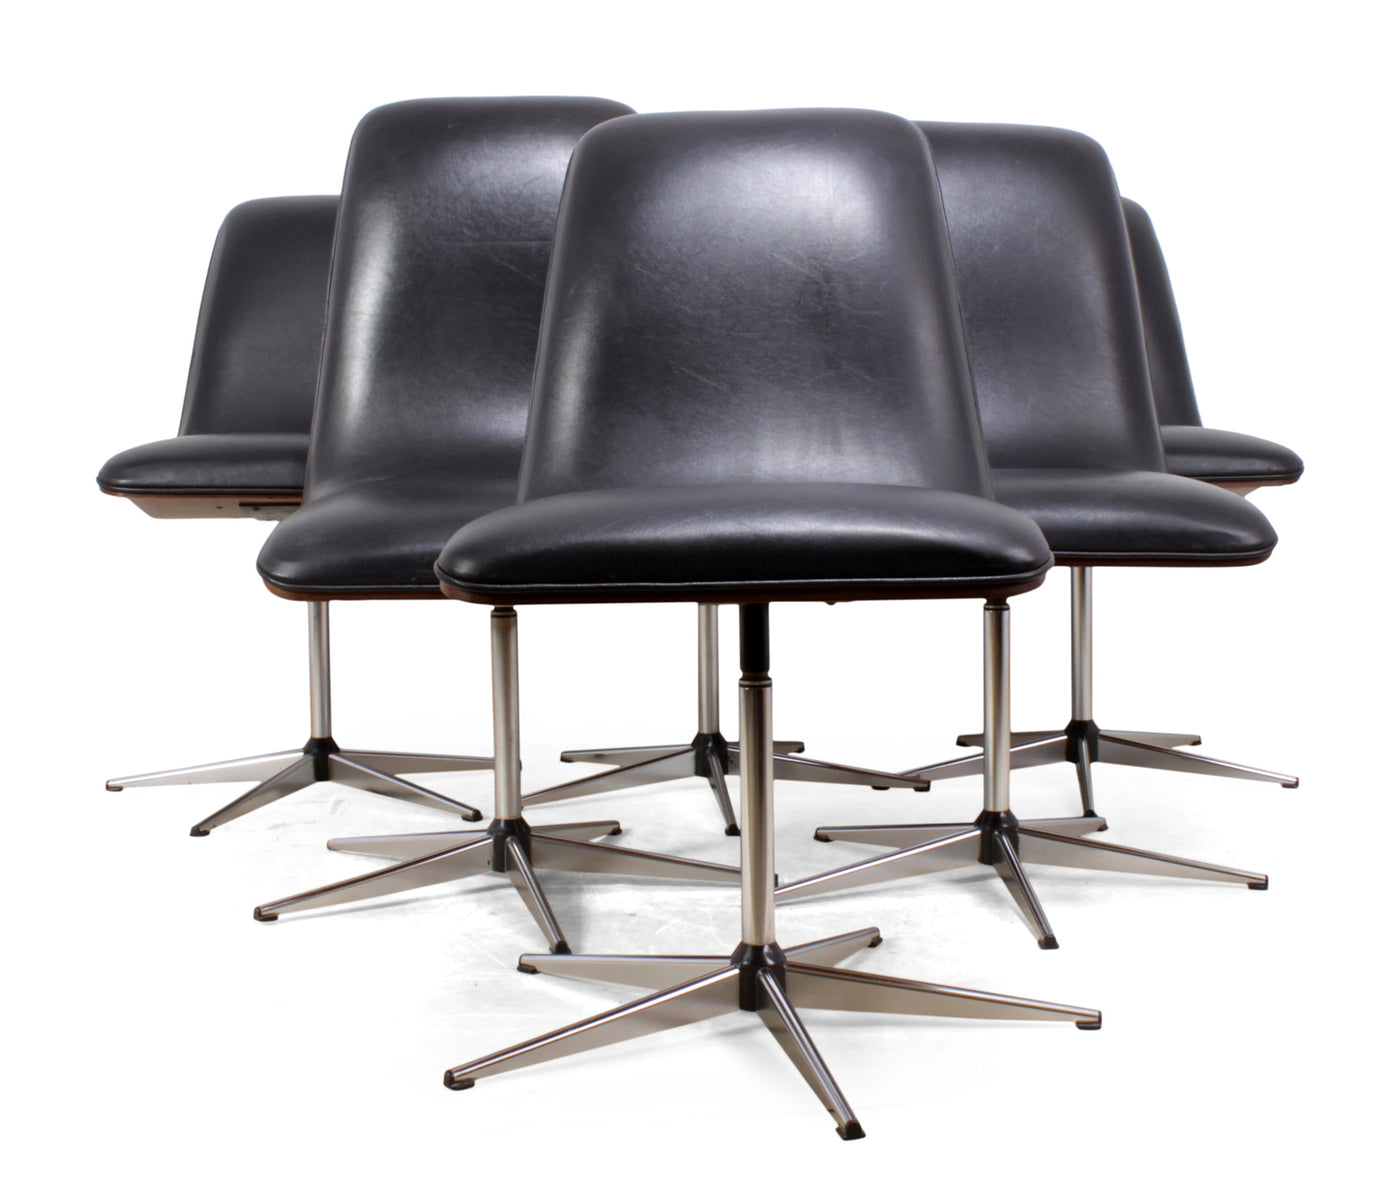 Designed in the late 50's by Robert heritage and produced by Archie Shine this set of six dining chairs have vinyl seats and bent ply rosewood backs sitting on chromed steel swivel bases, chairs are in overall good condition with one black plastic foot missing from one chair